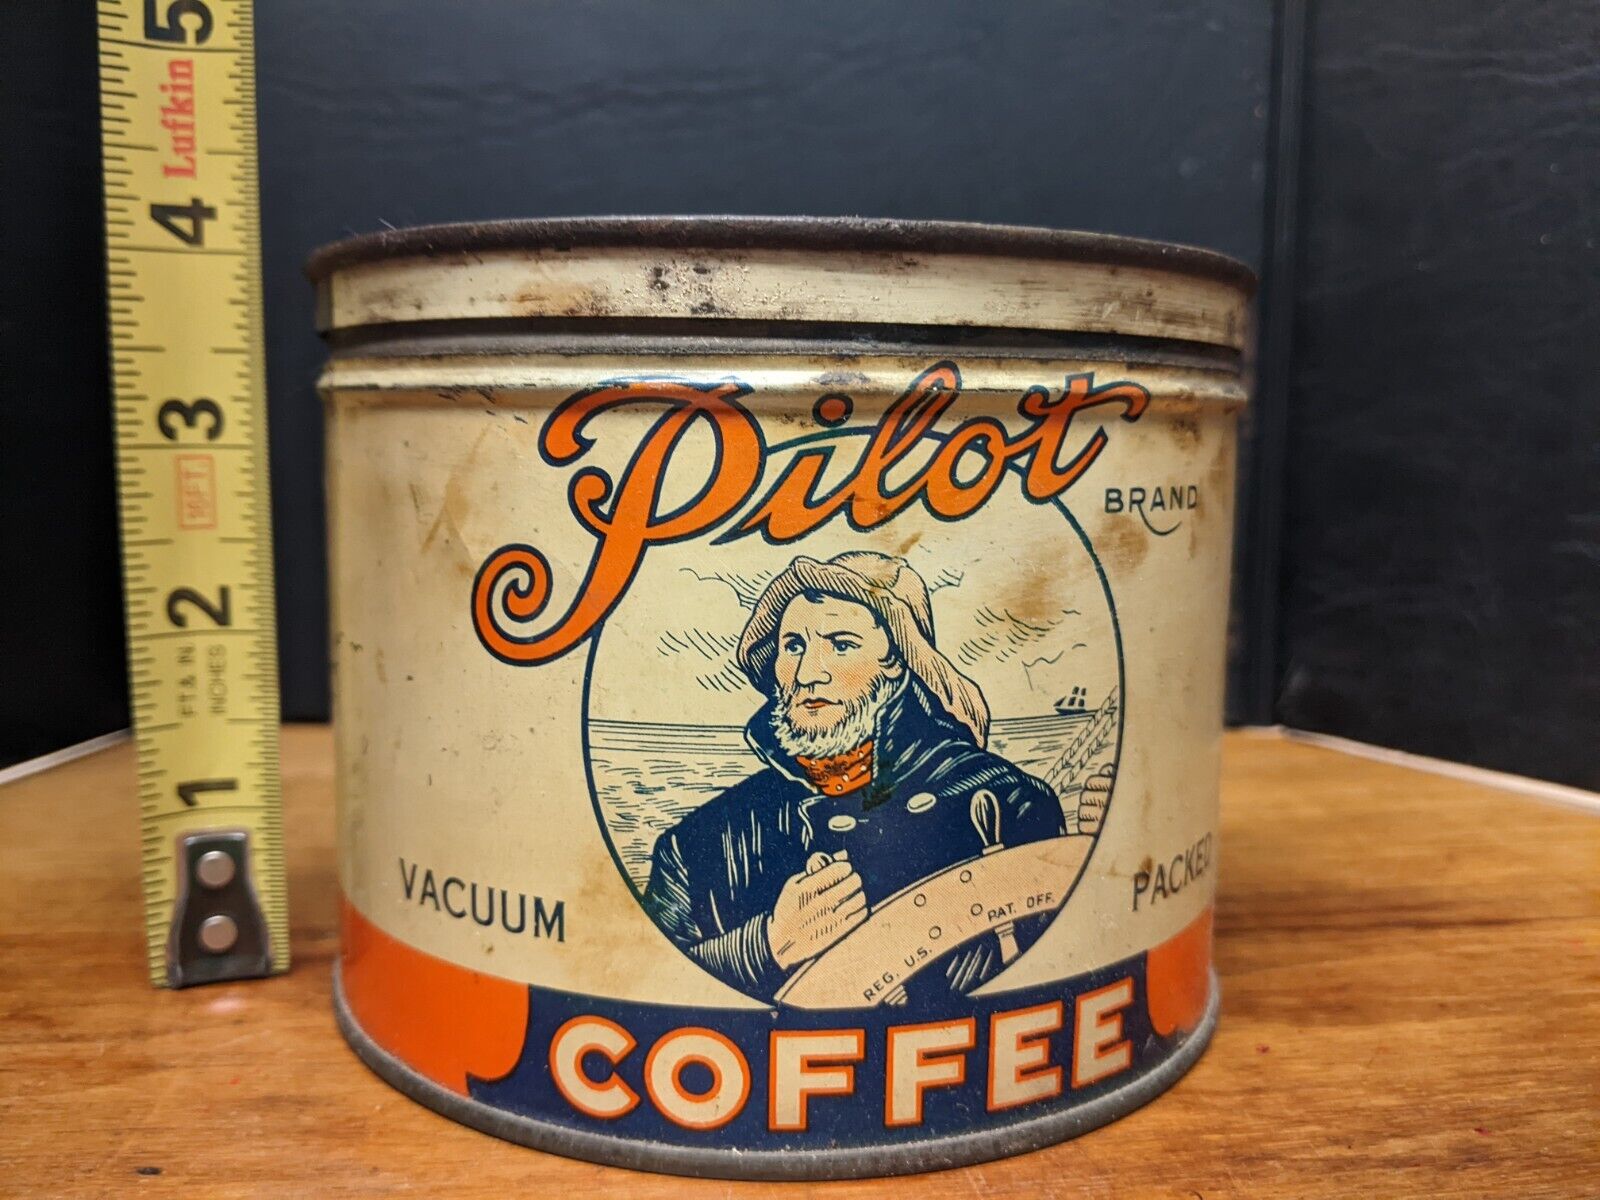 Pilot Brand Coffee Metal Can St. Louis Mo. - Sailor - 1 pound - General Coffee C